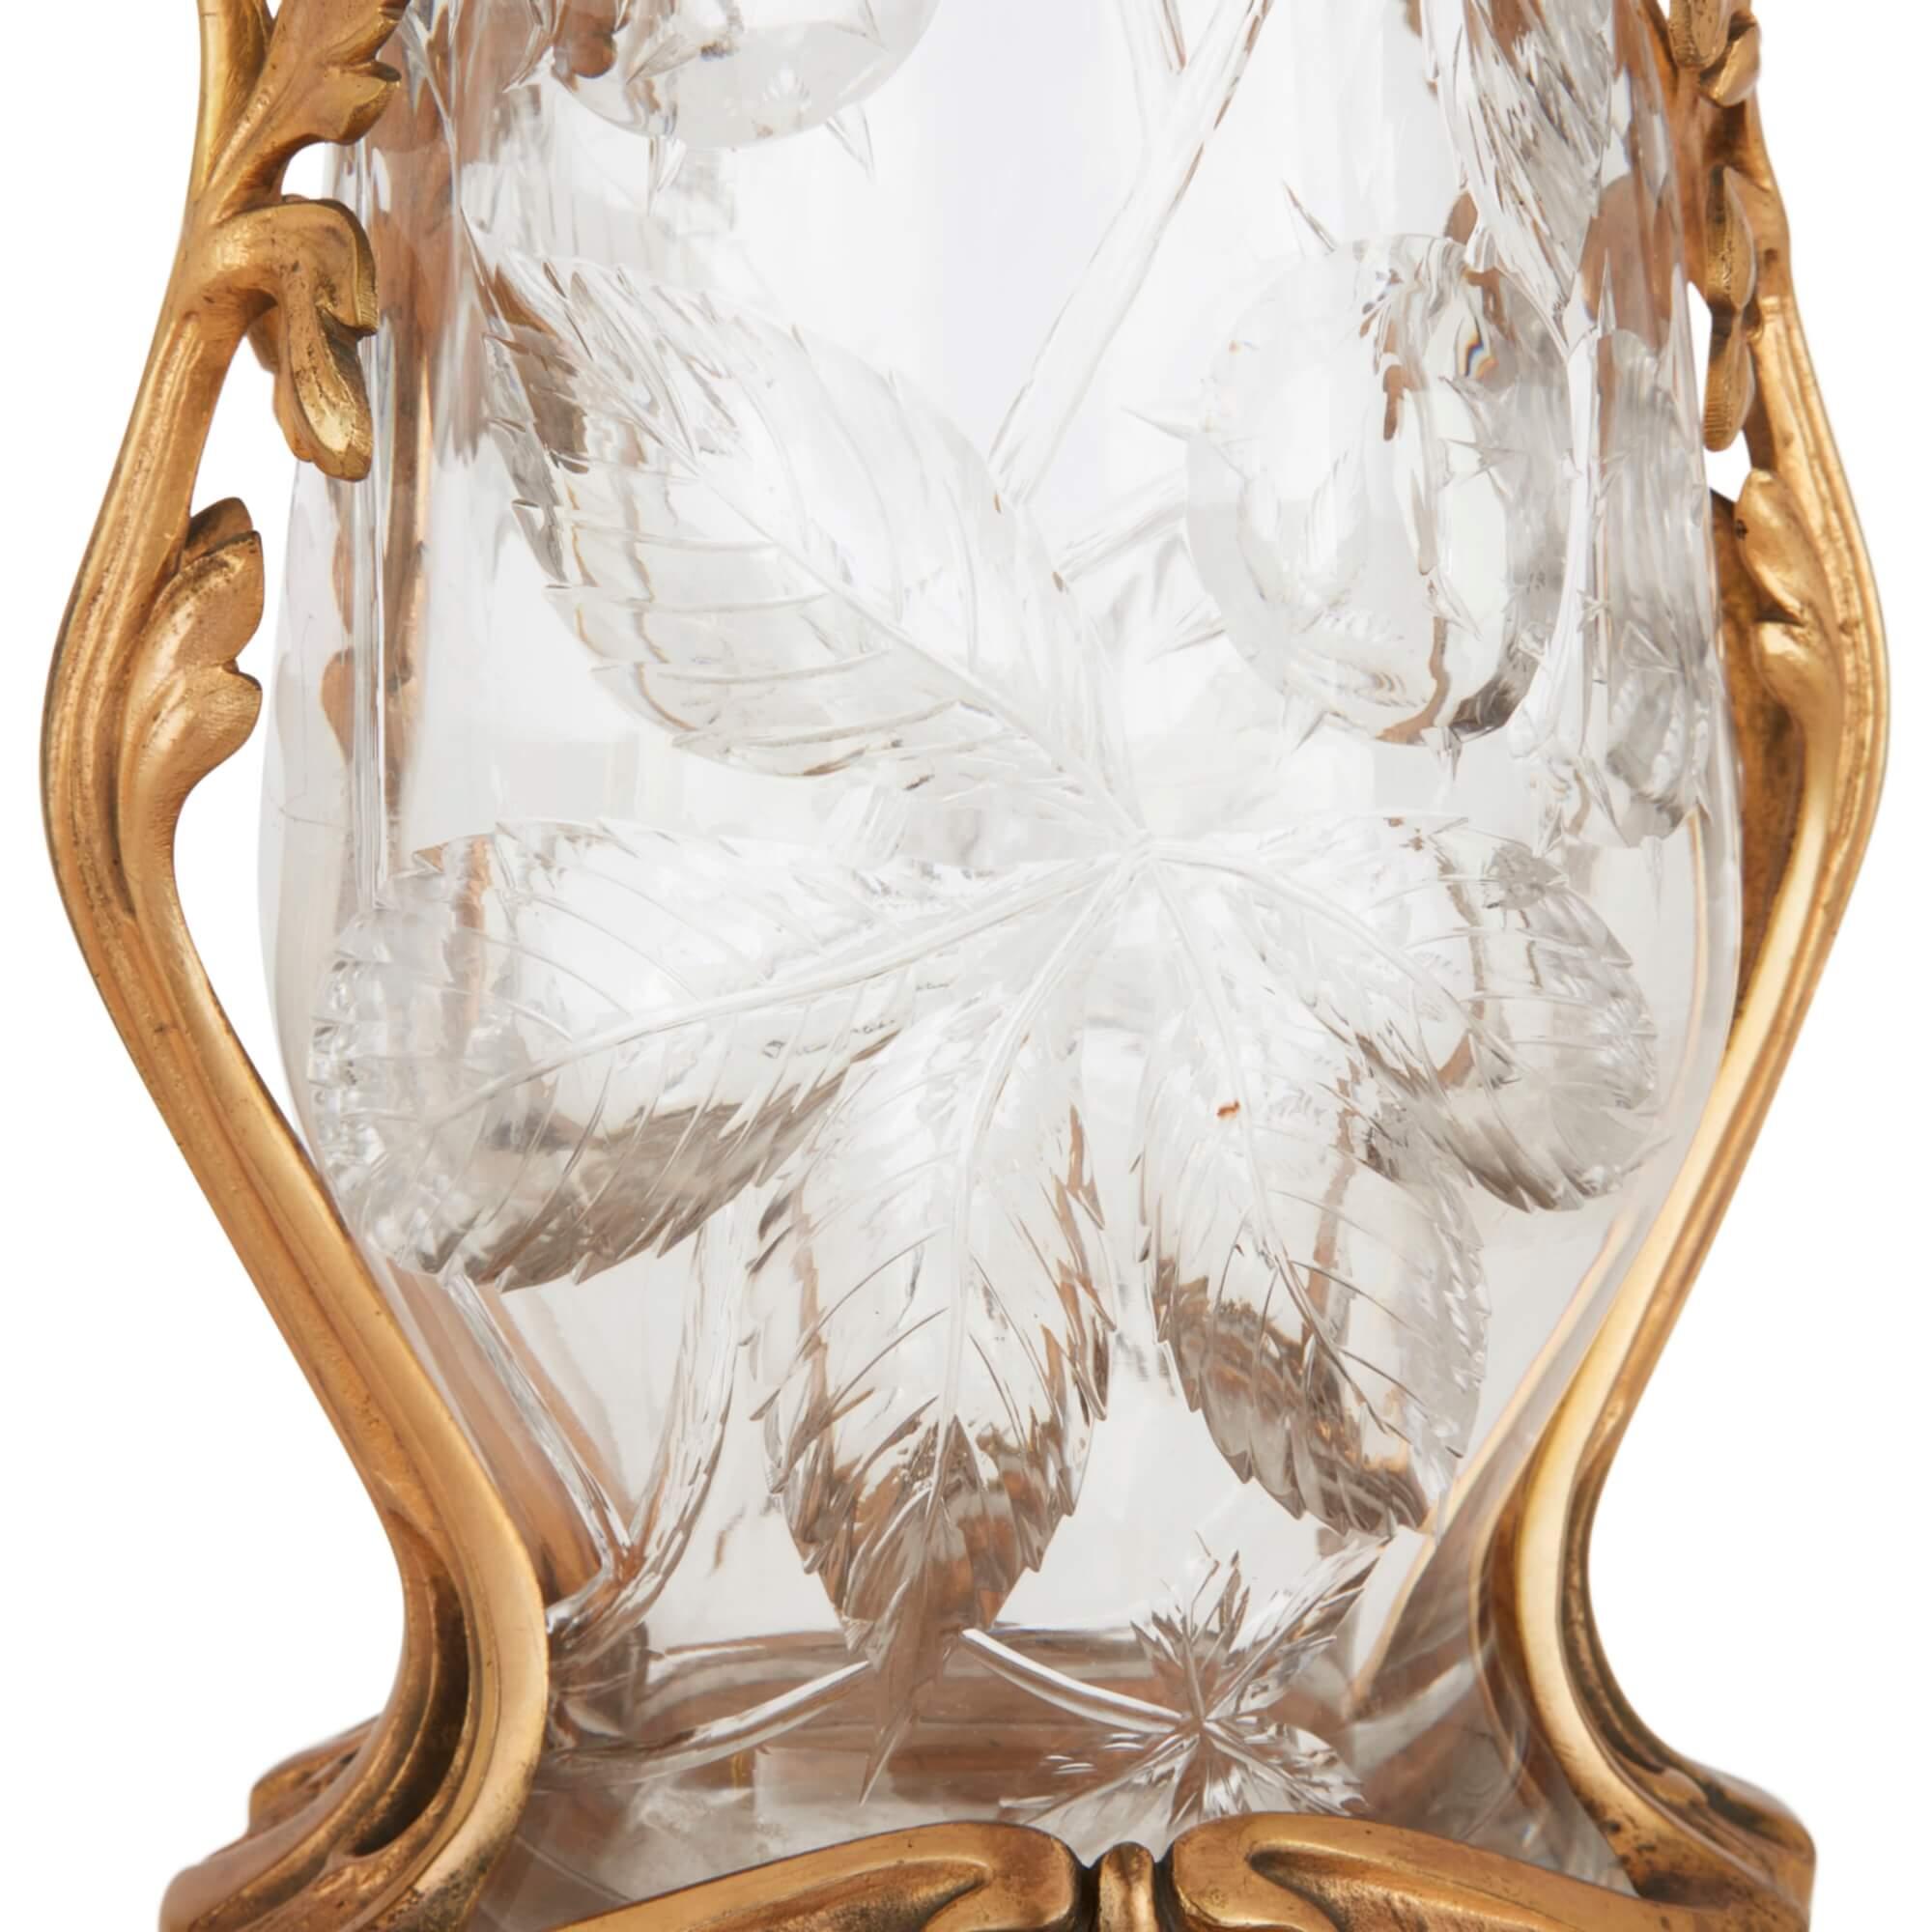 20th Century Art Nouveau Baccarat Crystal Vase with Ormolu Base For Sale